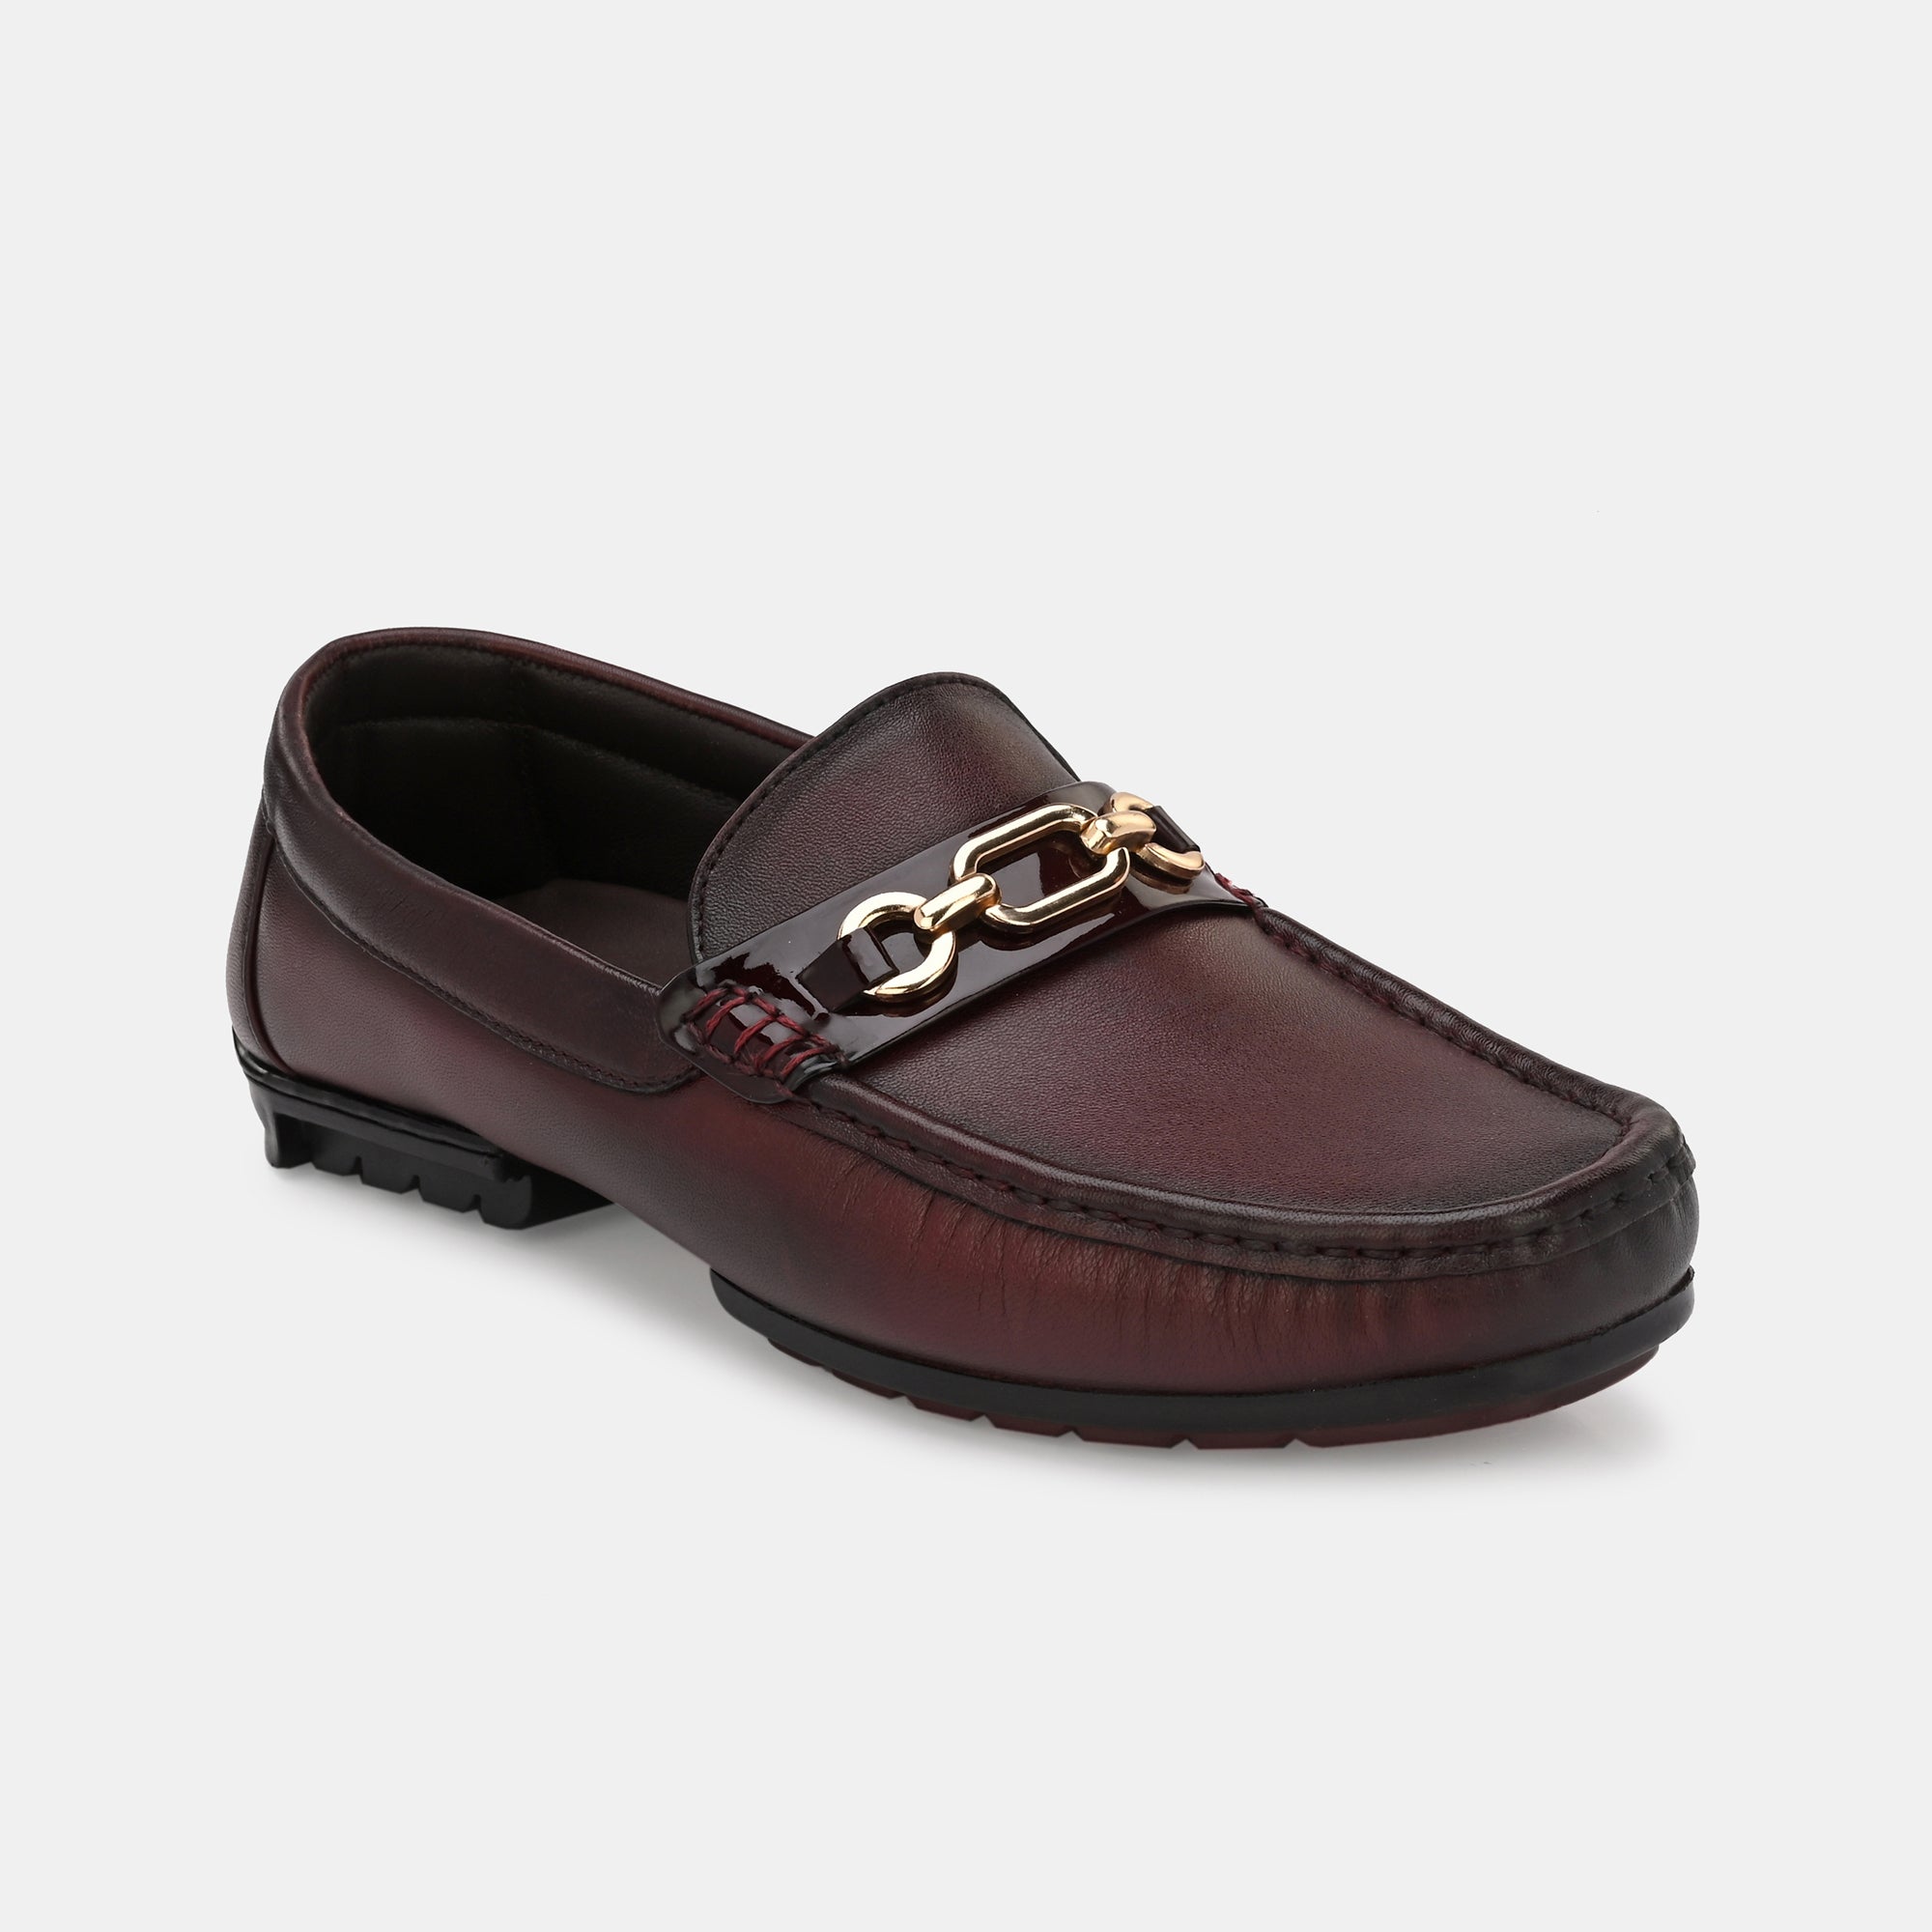 Cherry Buckled Loafers by Lafattio